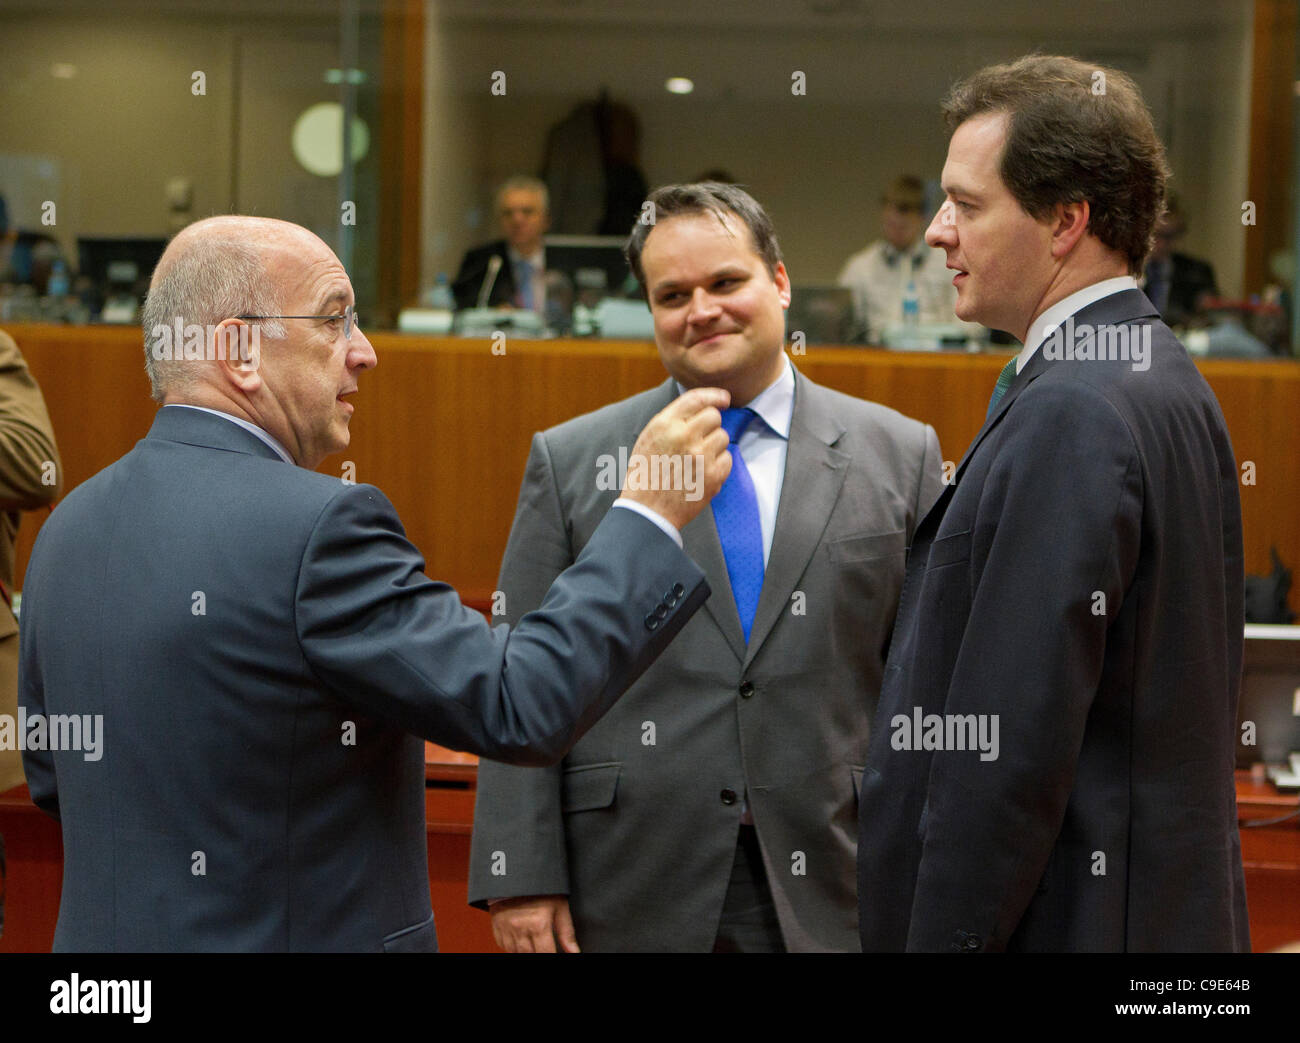 Pictured at the Ecofin meeting of European Finance Ministers  Joaquín Almunia, Vice-President of the European Commission. Jan Kees de Jager, Finance Minister, . British Chancellor of the Exchequer, George Osborne. Stock Photo